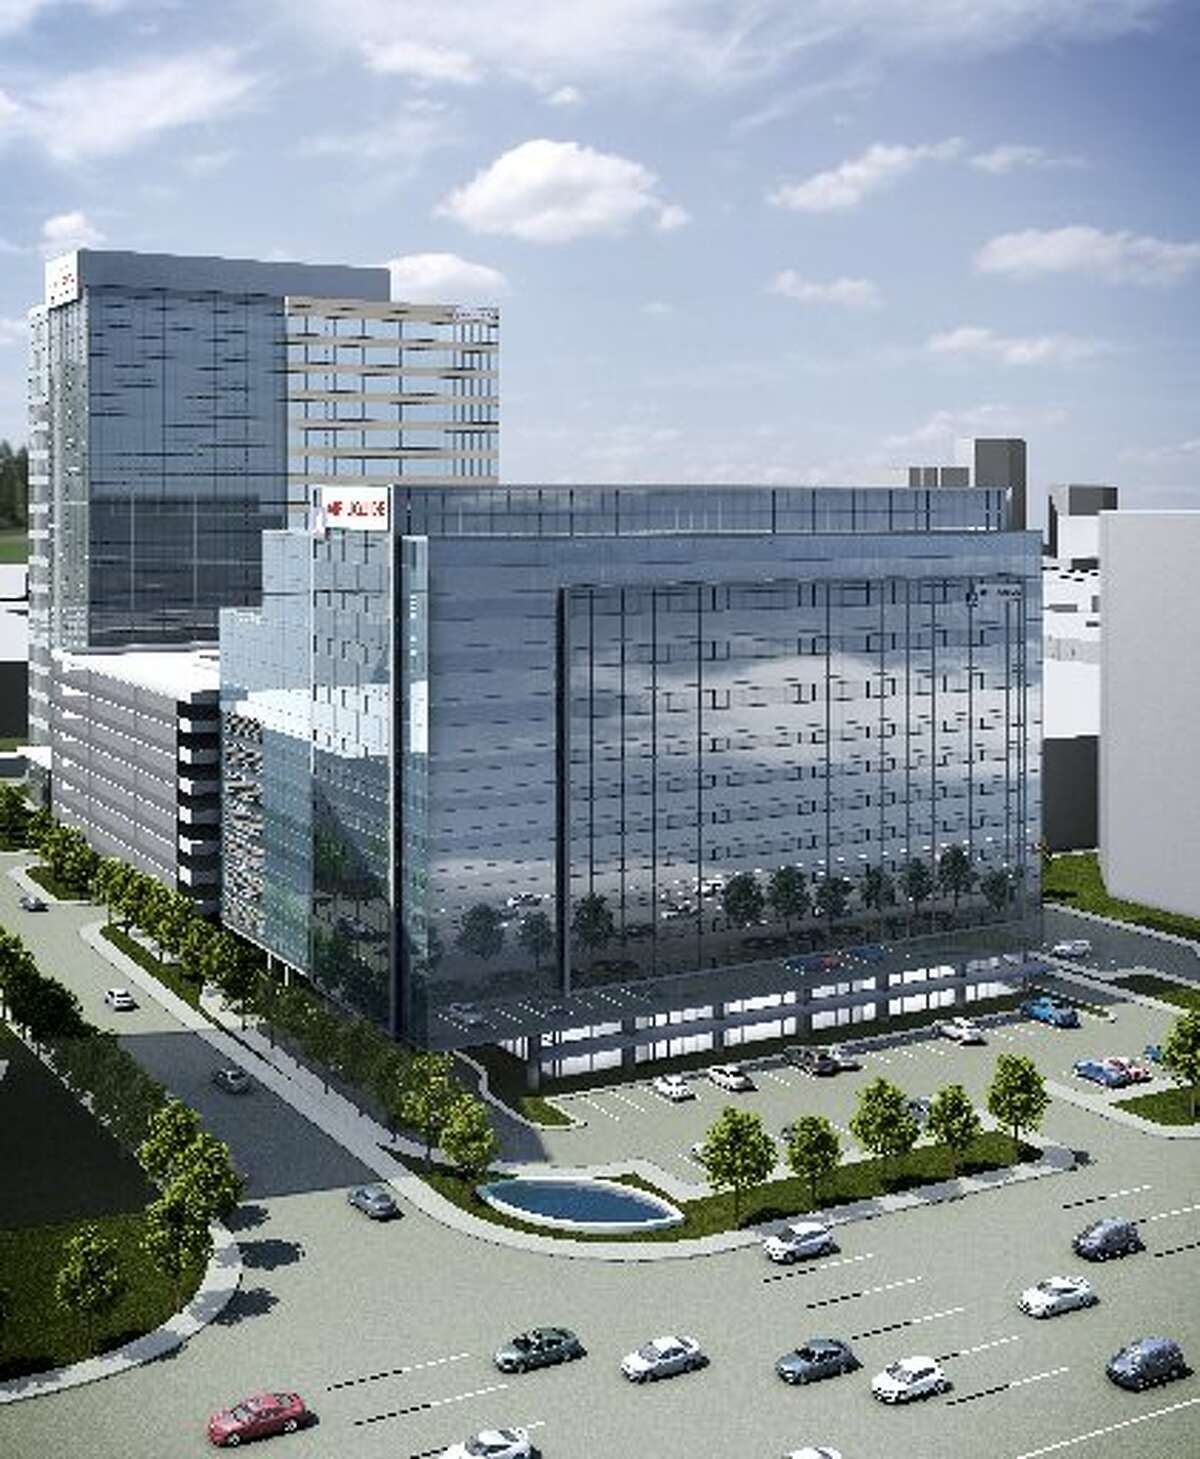 File renderings from MetroNational. Air Liquide pre-leased space in two buildings developed by MetroNational at Memorial City. Air Liquide Center has a 20-story tower with 452,000 square feet and an adjacent 12-story building with 145,000 square feet. The buildings are at 9811 and 9807 Katy Freeway.